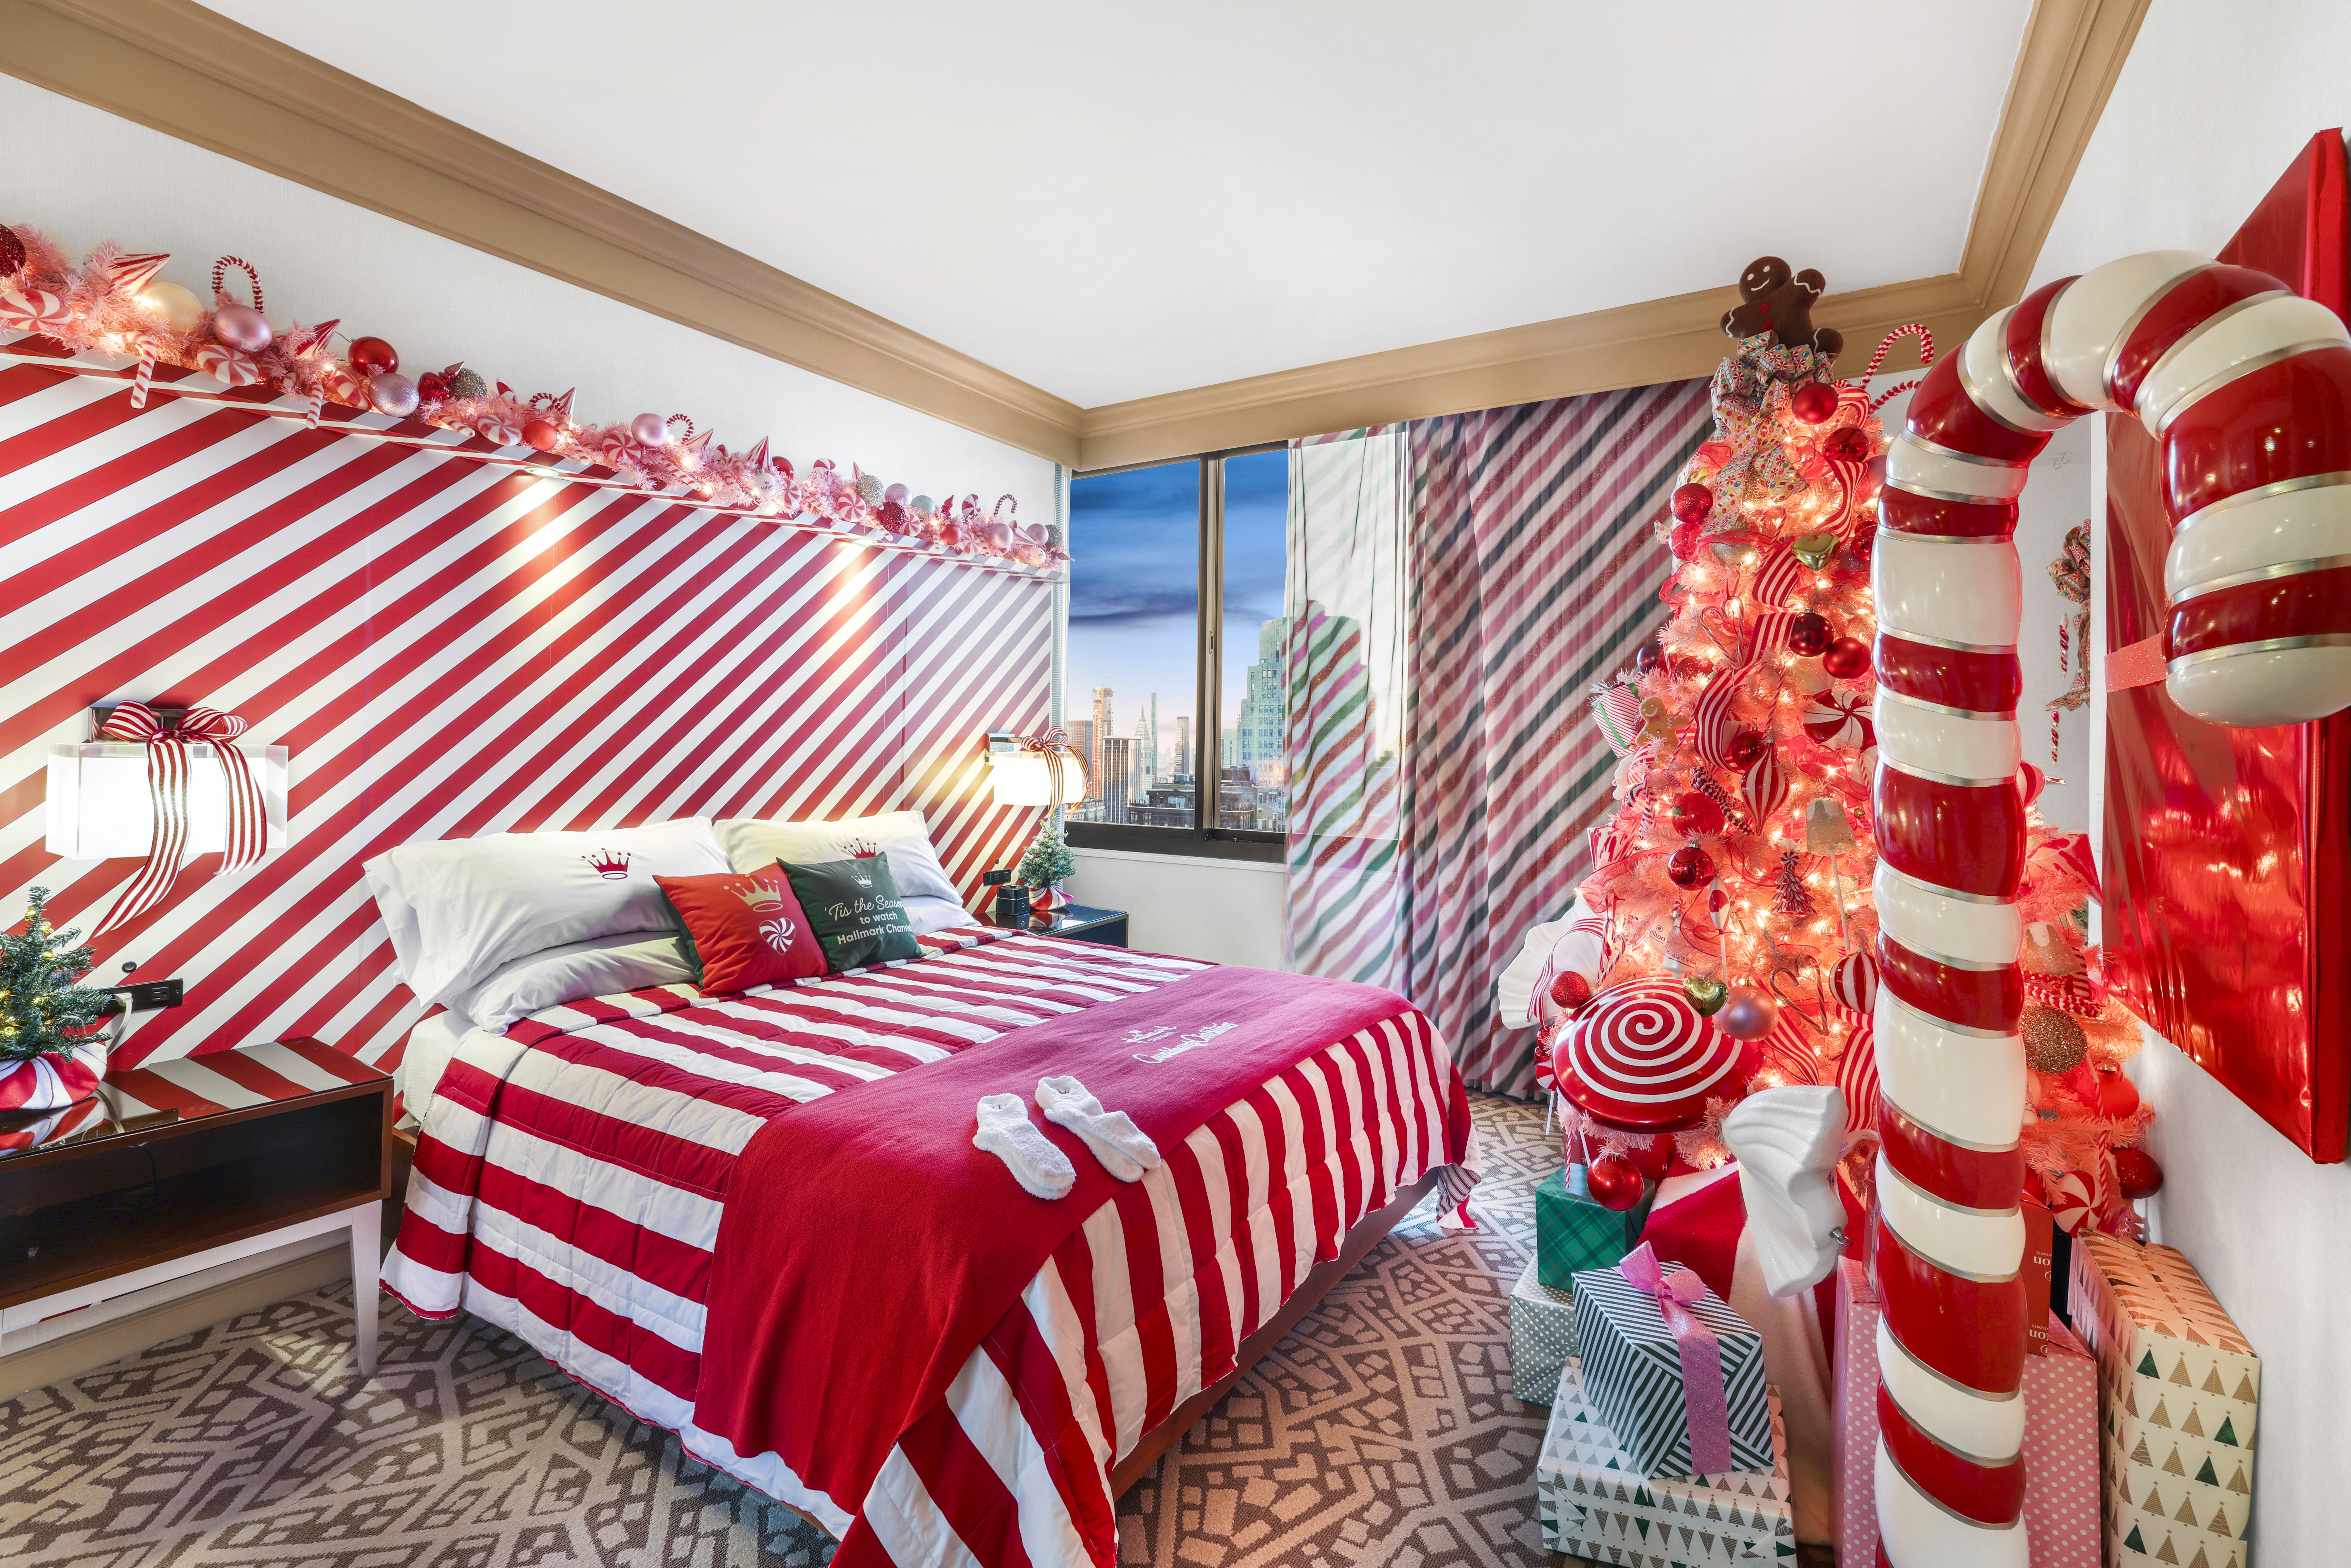 Hilton and Hallmark Channel - Hallmark’s Holiday Sweetest Suite at Hilton New York Times Square - Bed